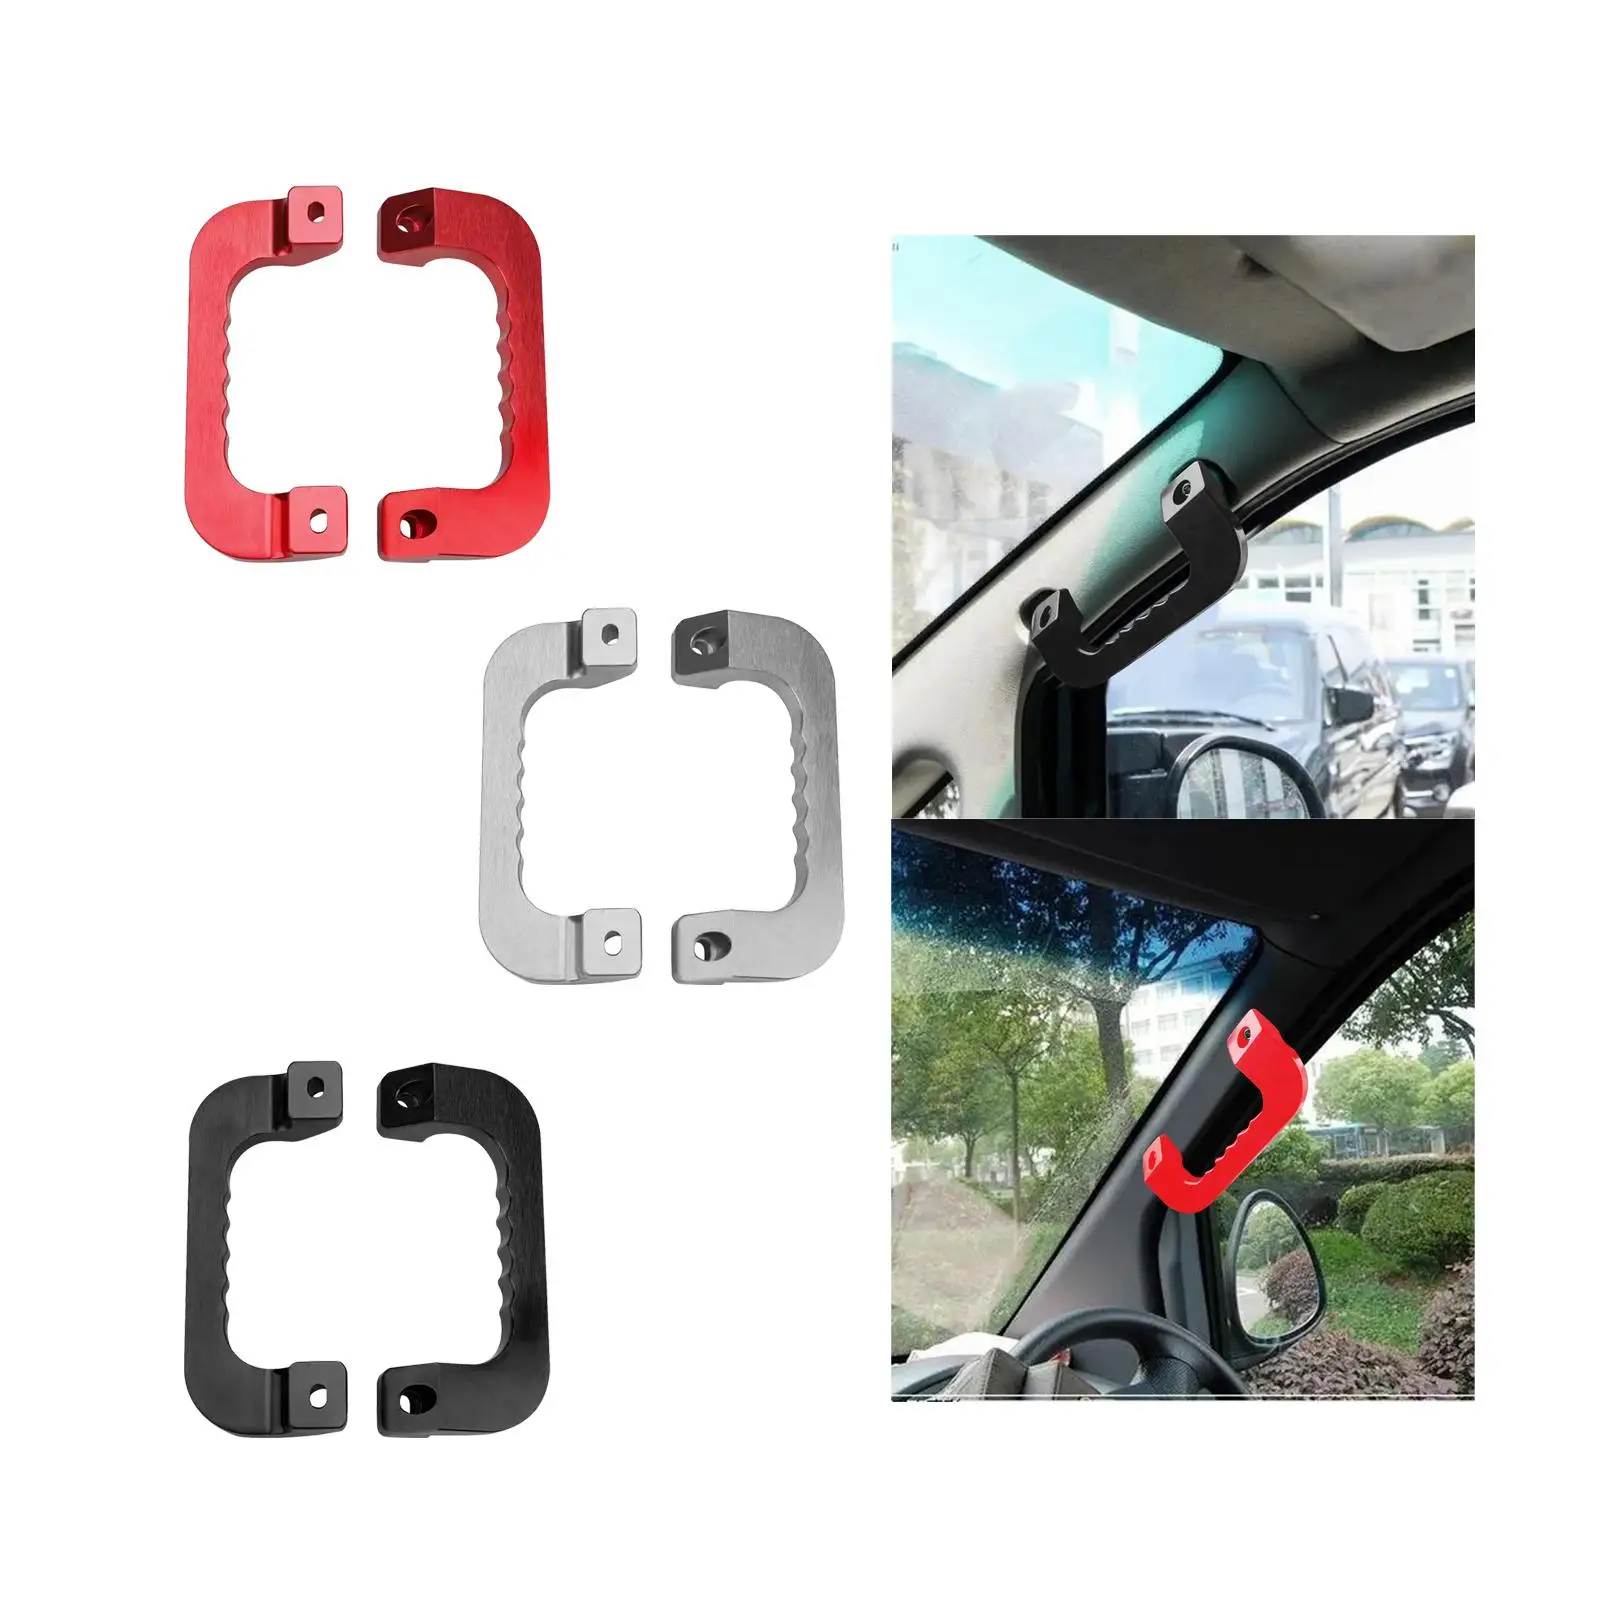 Grab Roof Handle for Truck Cargo Trailer Replacement Automobile Car Interior Professional Durable Grip Assist Handle